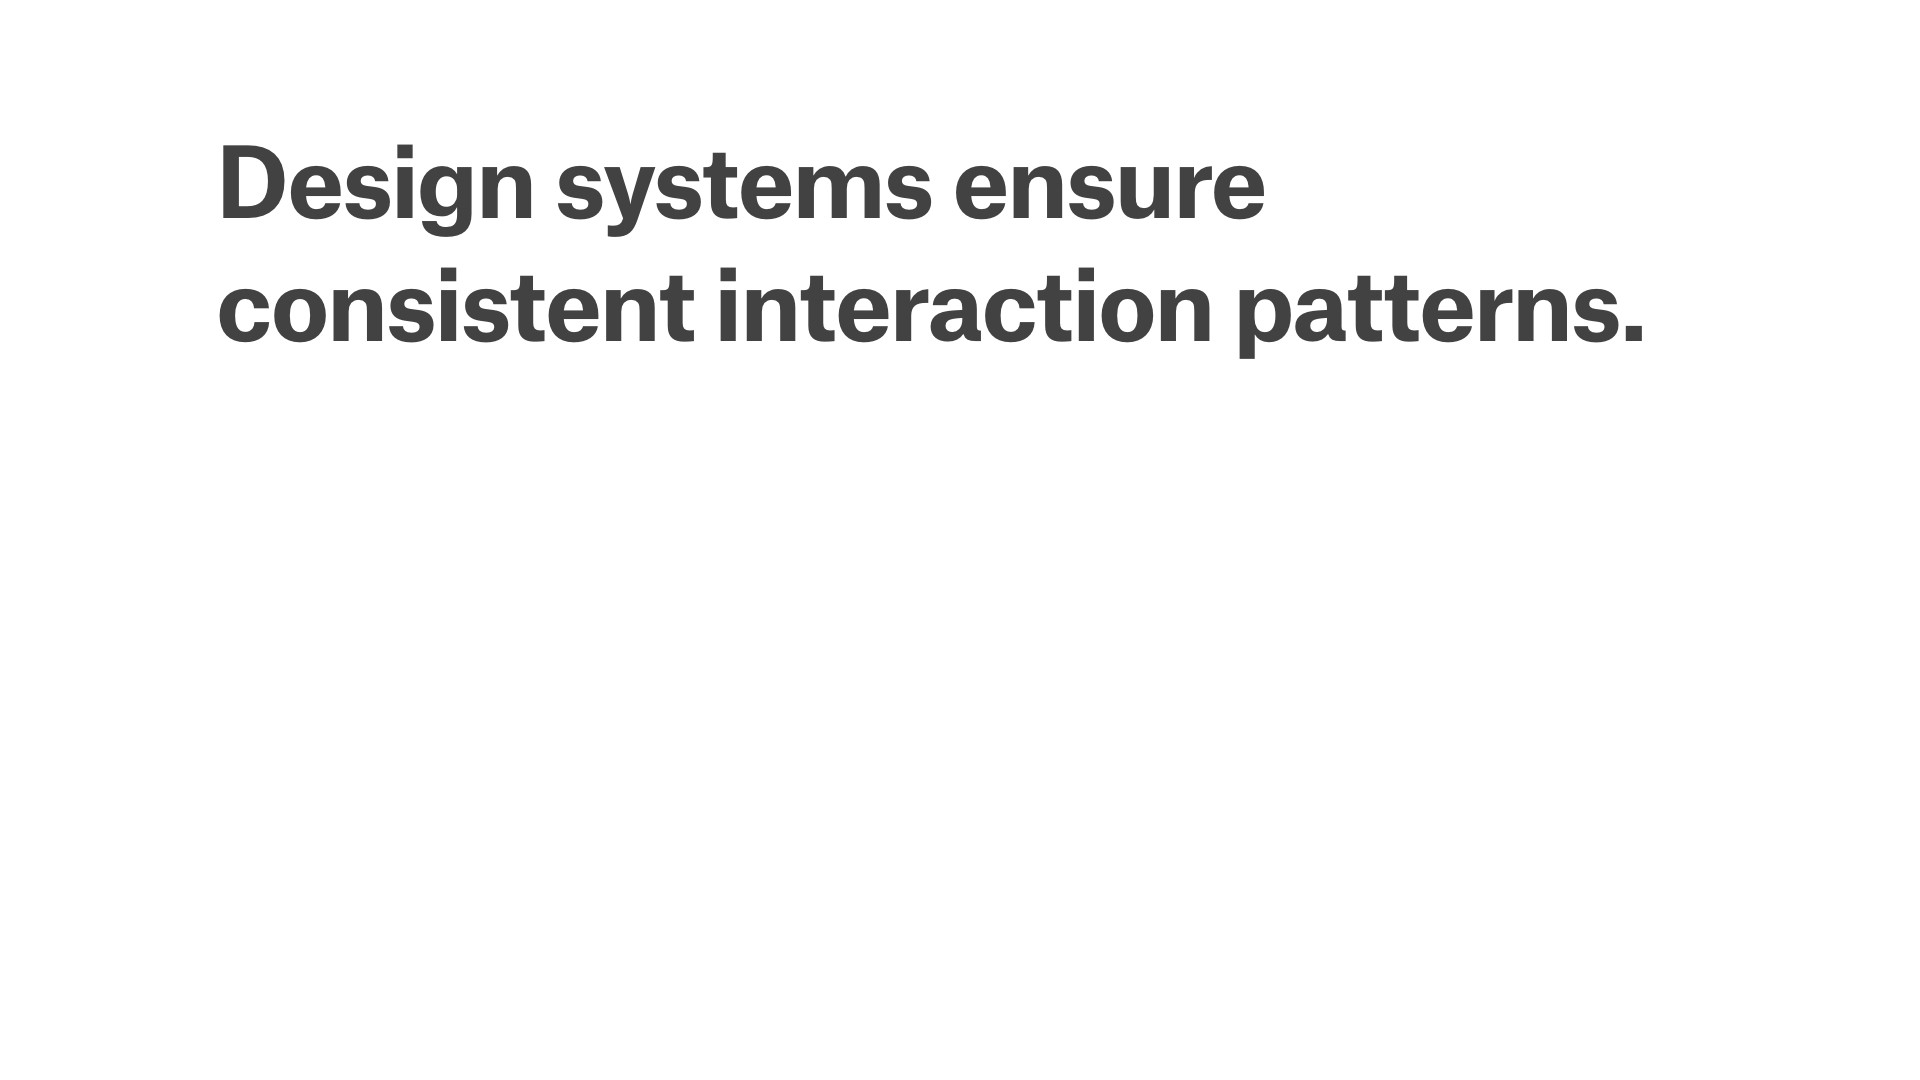 Design systems ensure consistent interaction patterns.